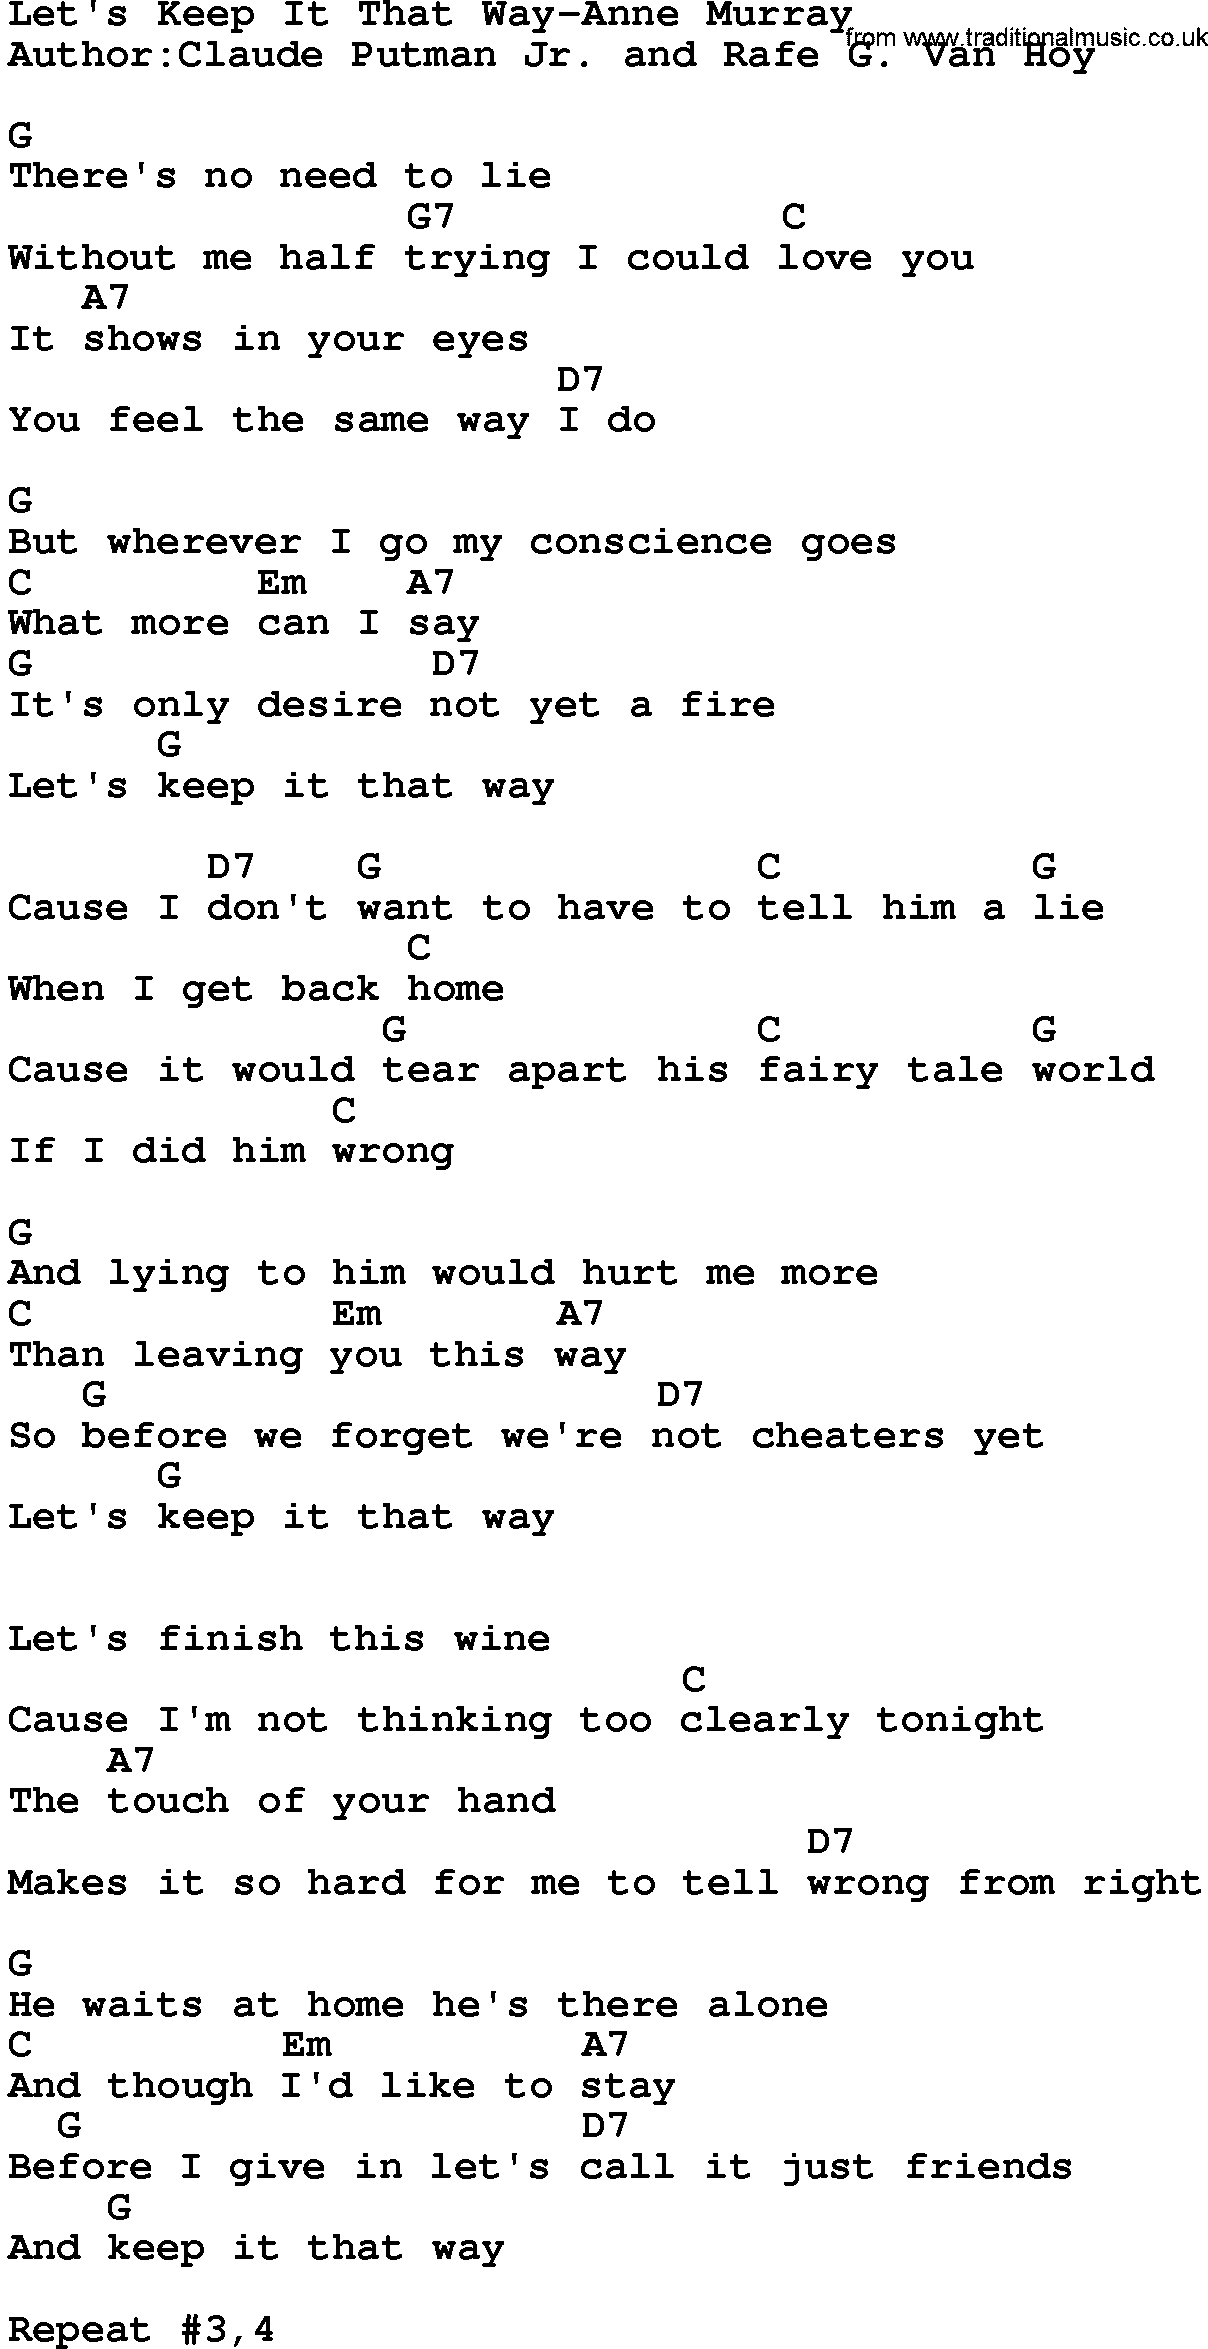 Country music song: Let's Keep It That Way-Anne Murray lyrics and chords